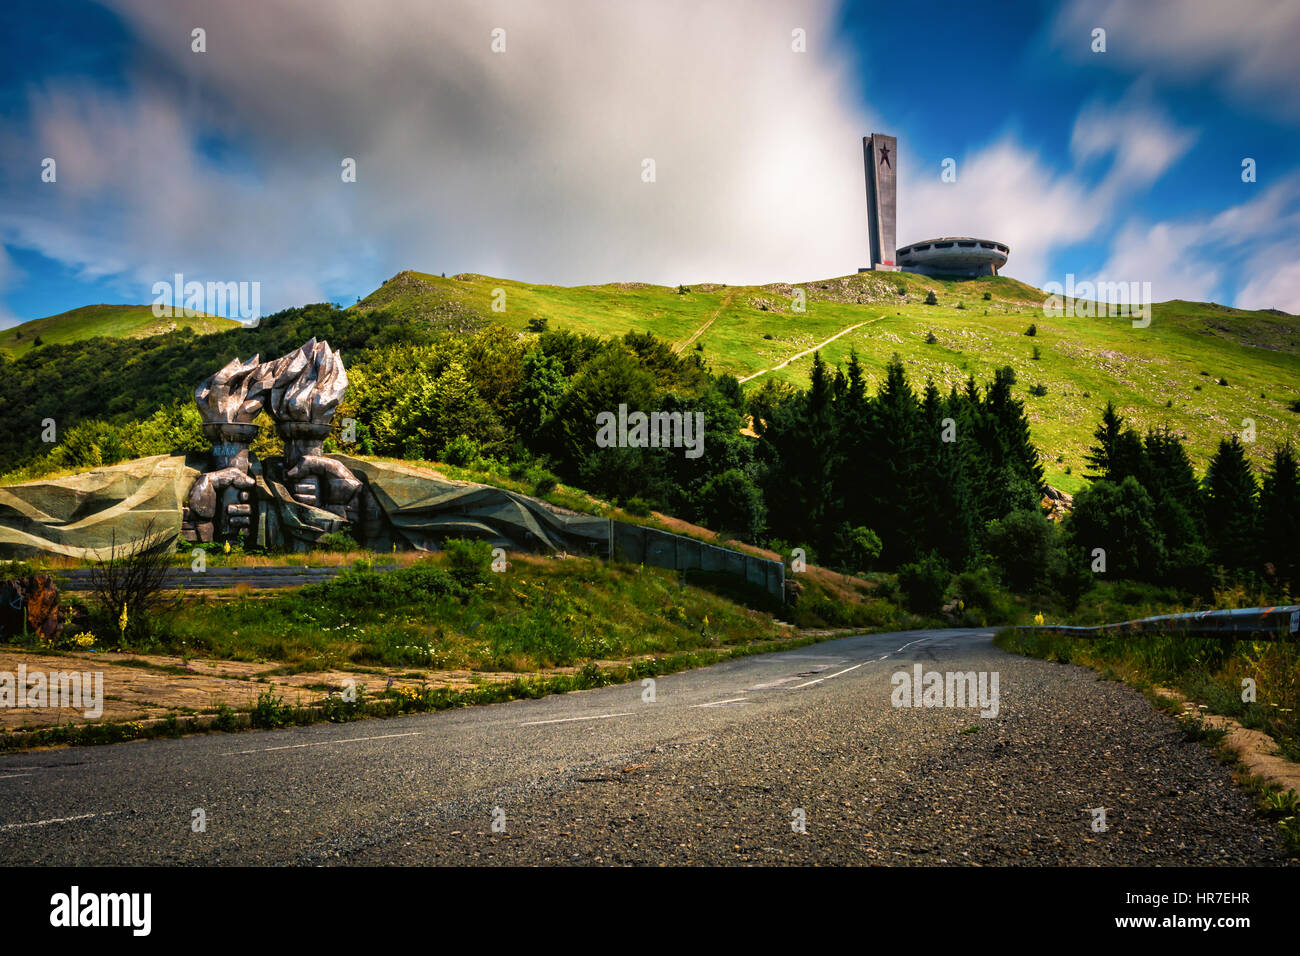 The House-Monument of the Bulgarian Communist Party. Buzludzha is a historical peak in the Central Balkan Mountains, Bulgaria. Stock Photo